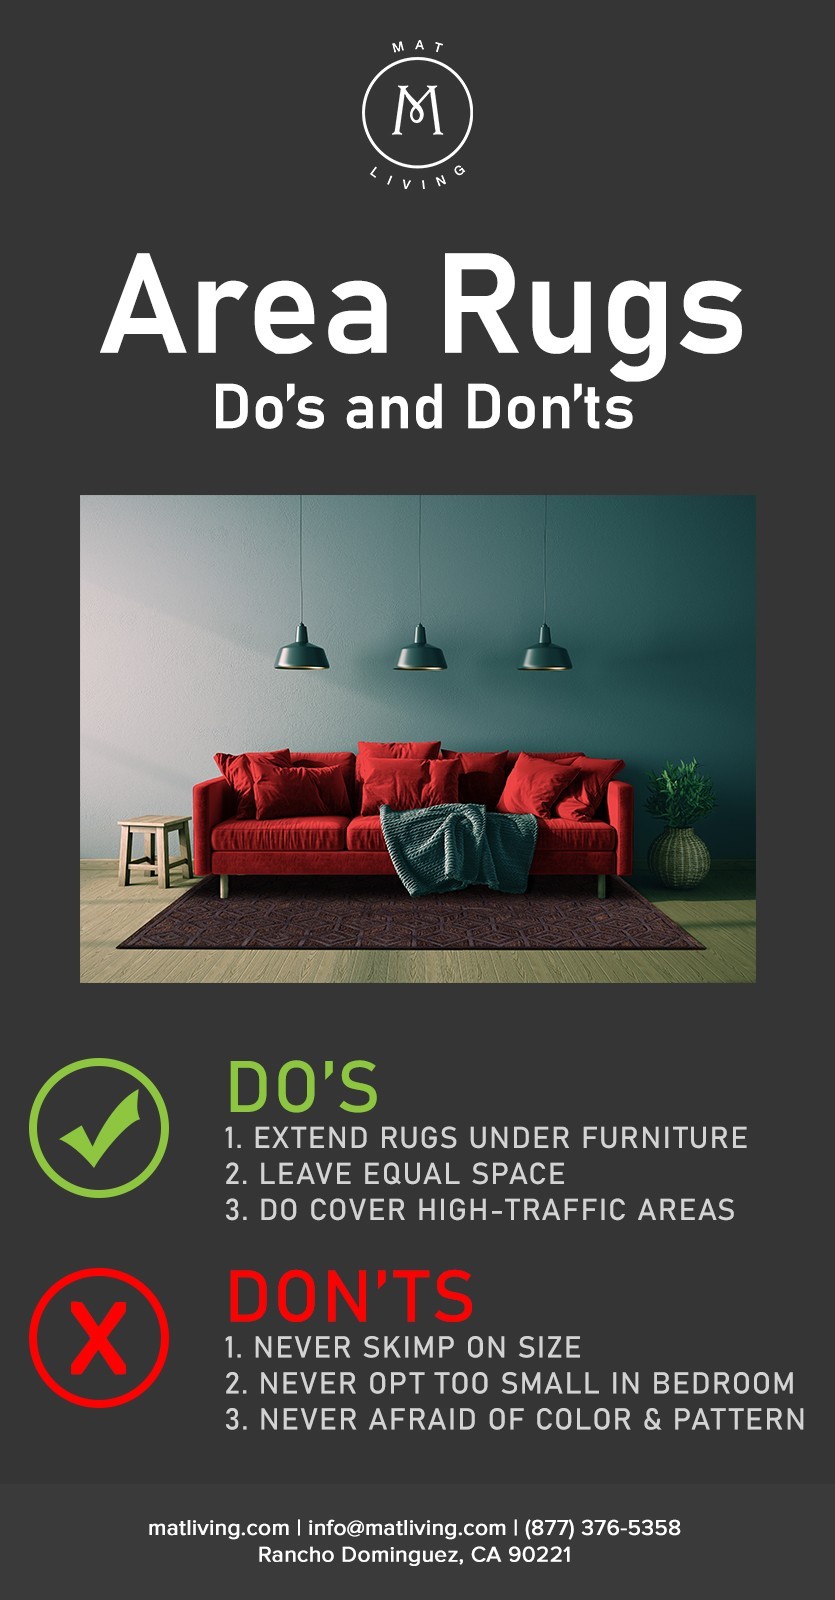 AreaRugsDos&Donts infographic